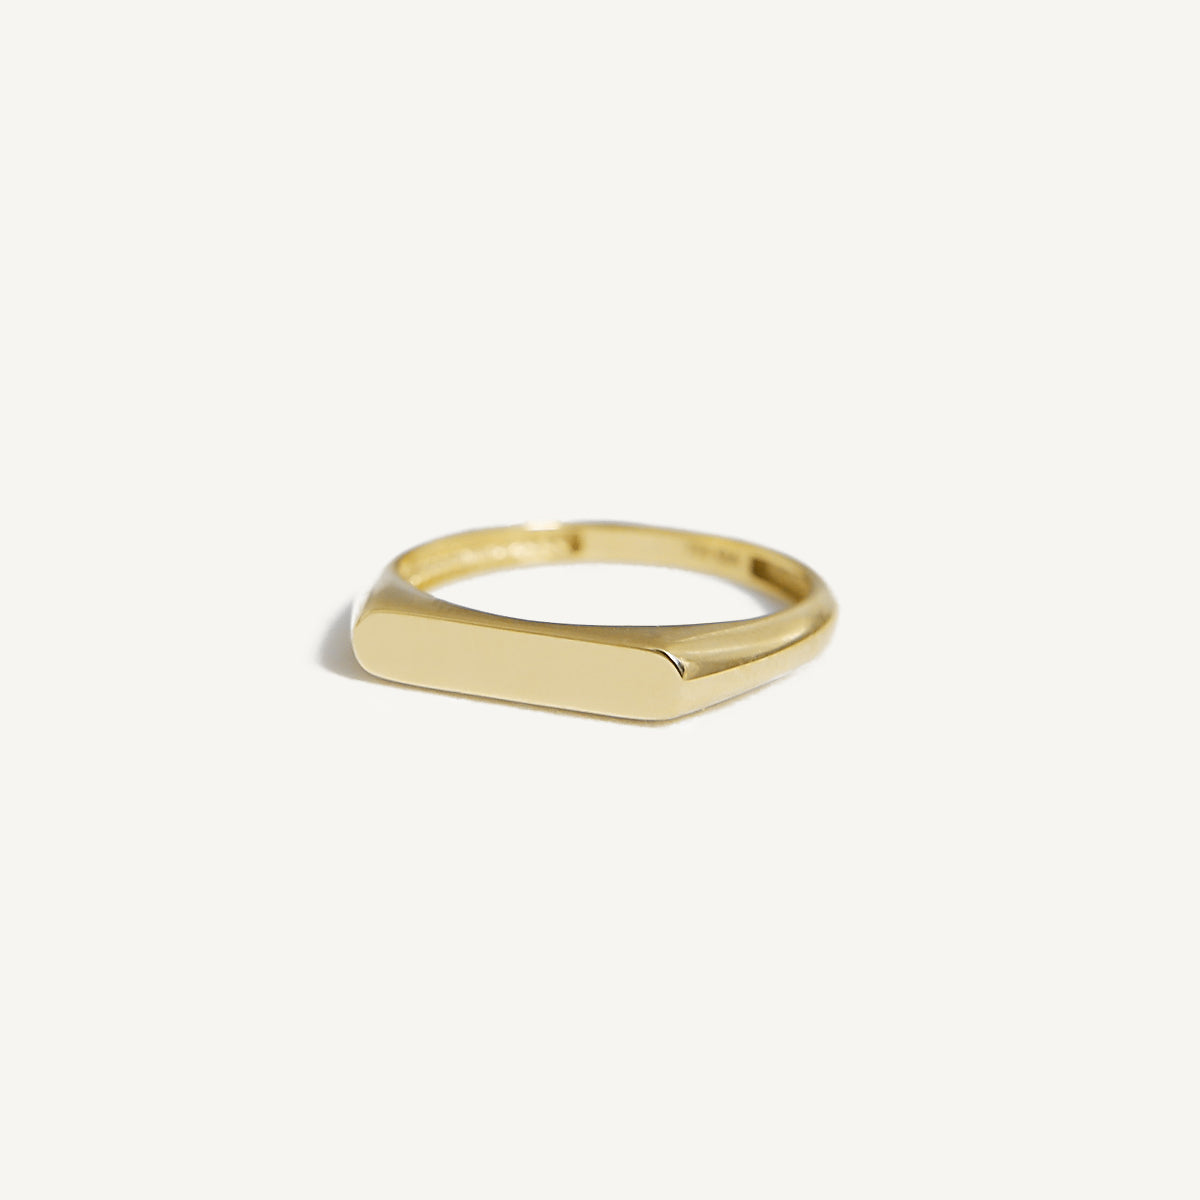 The Minimal Flat Signet Ring in Solid Gold